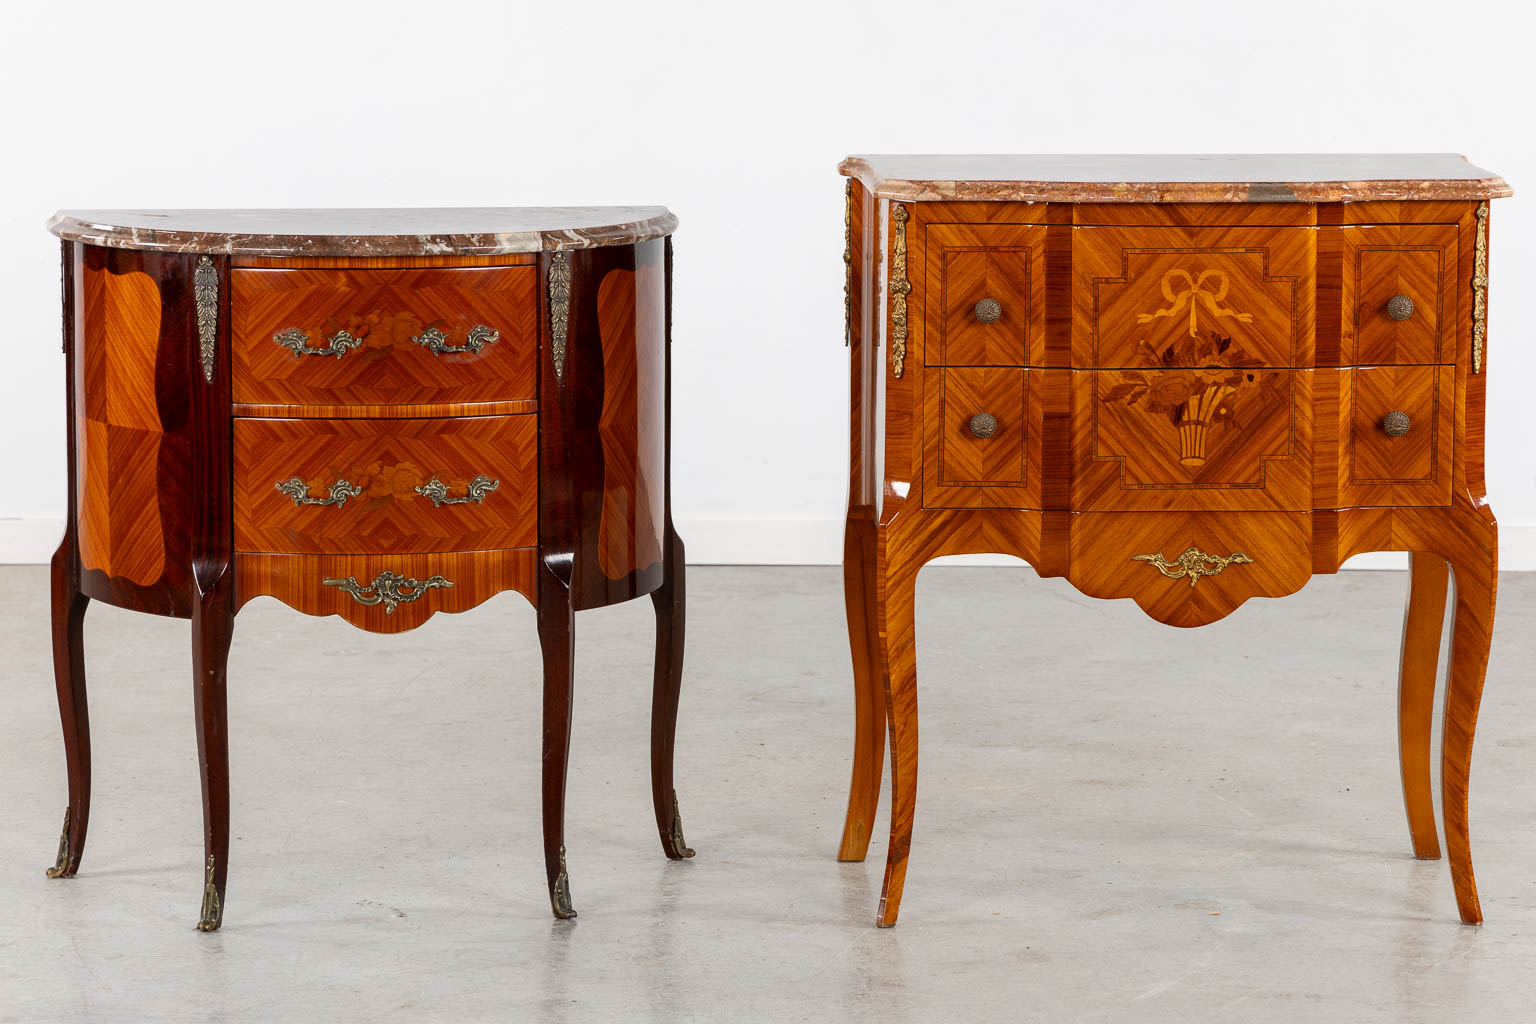 Two small cabinets with drawers, marquetry inlay and a marble top. 20th C. (L:39 x W:70 x H:80 cm)